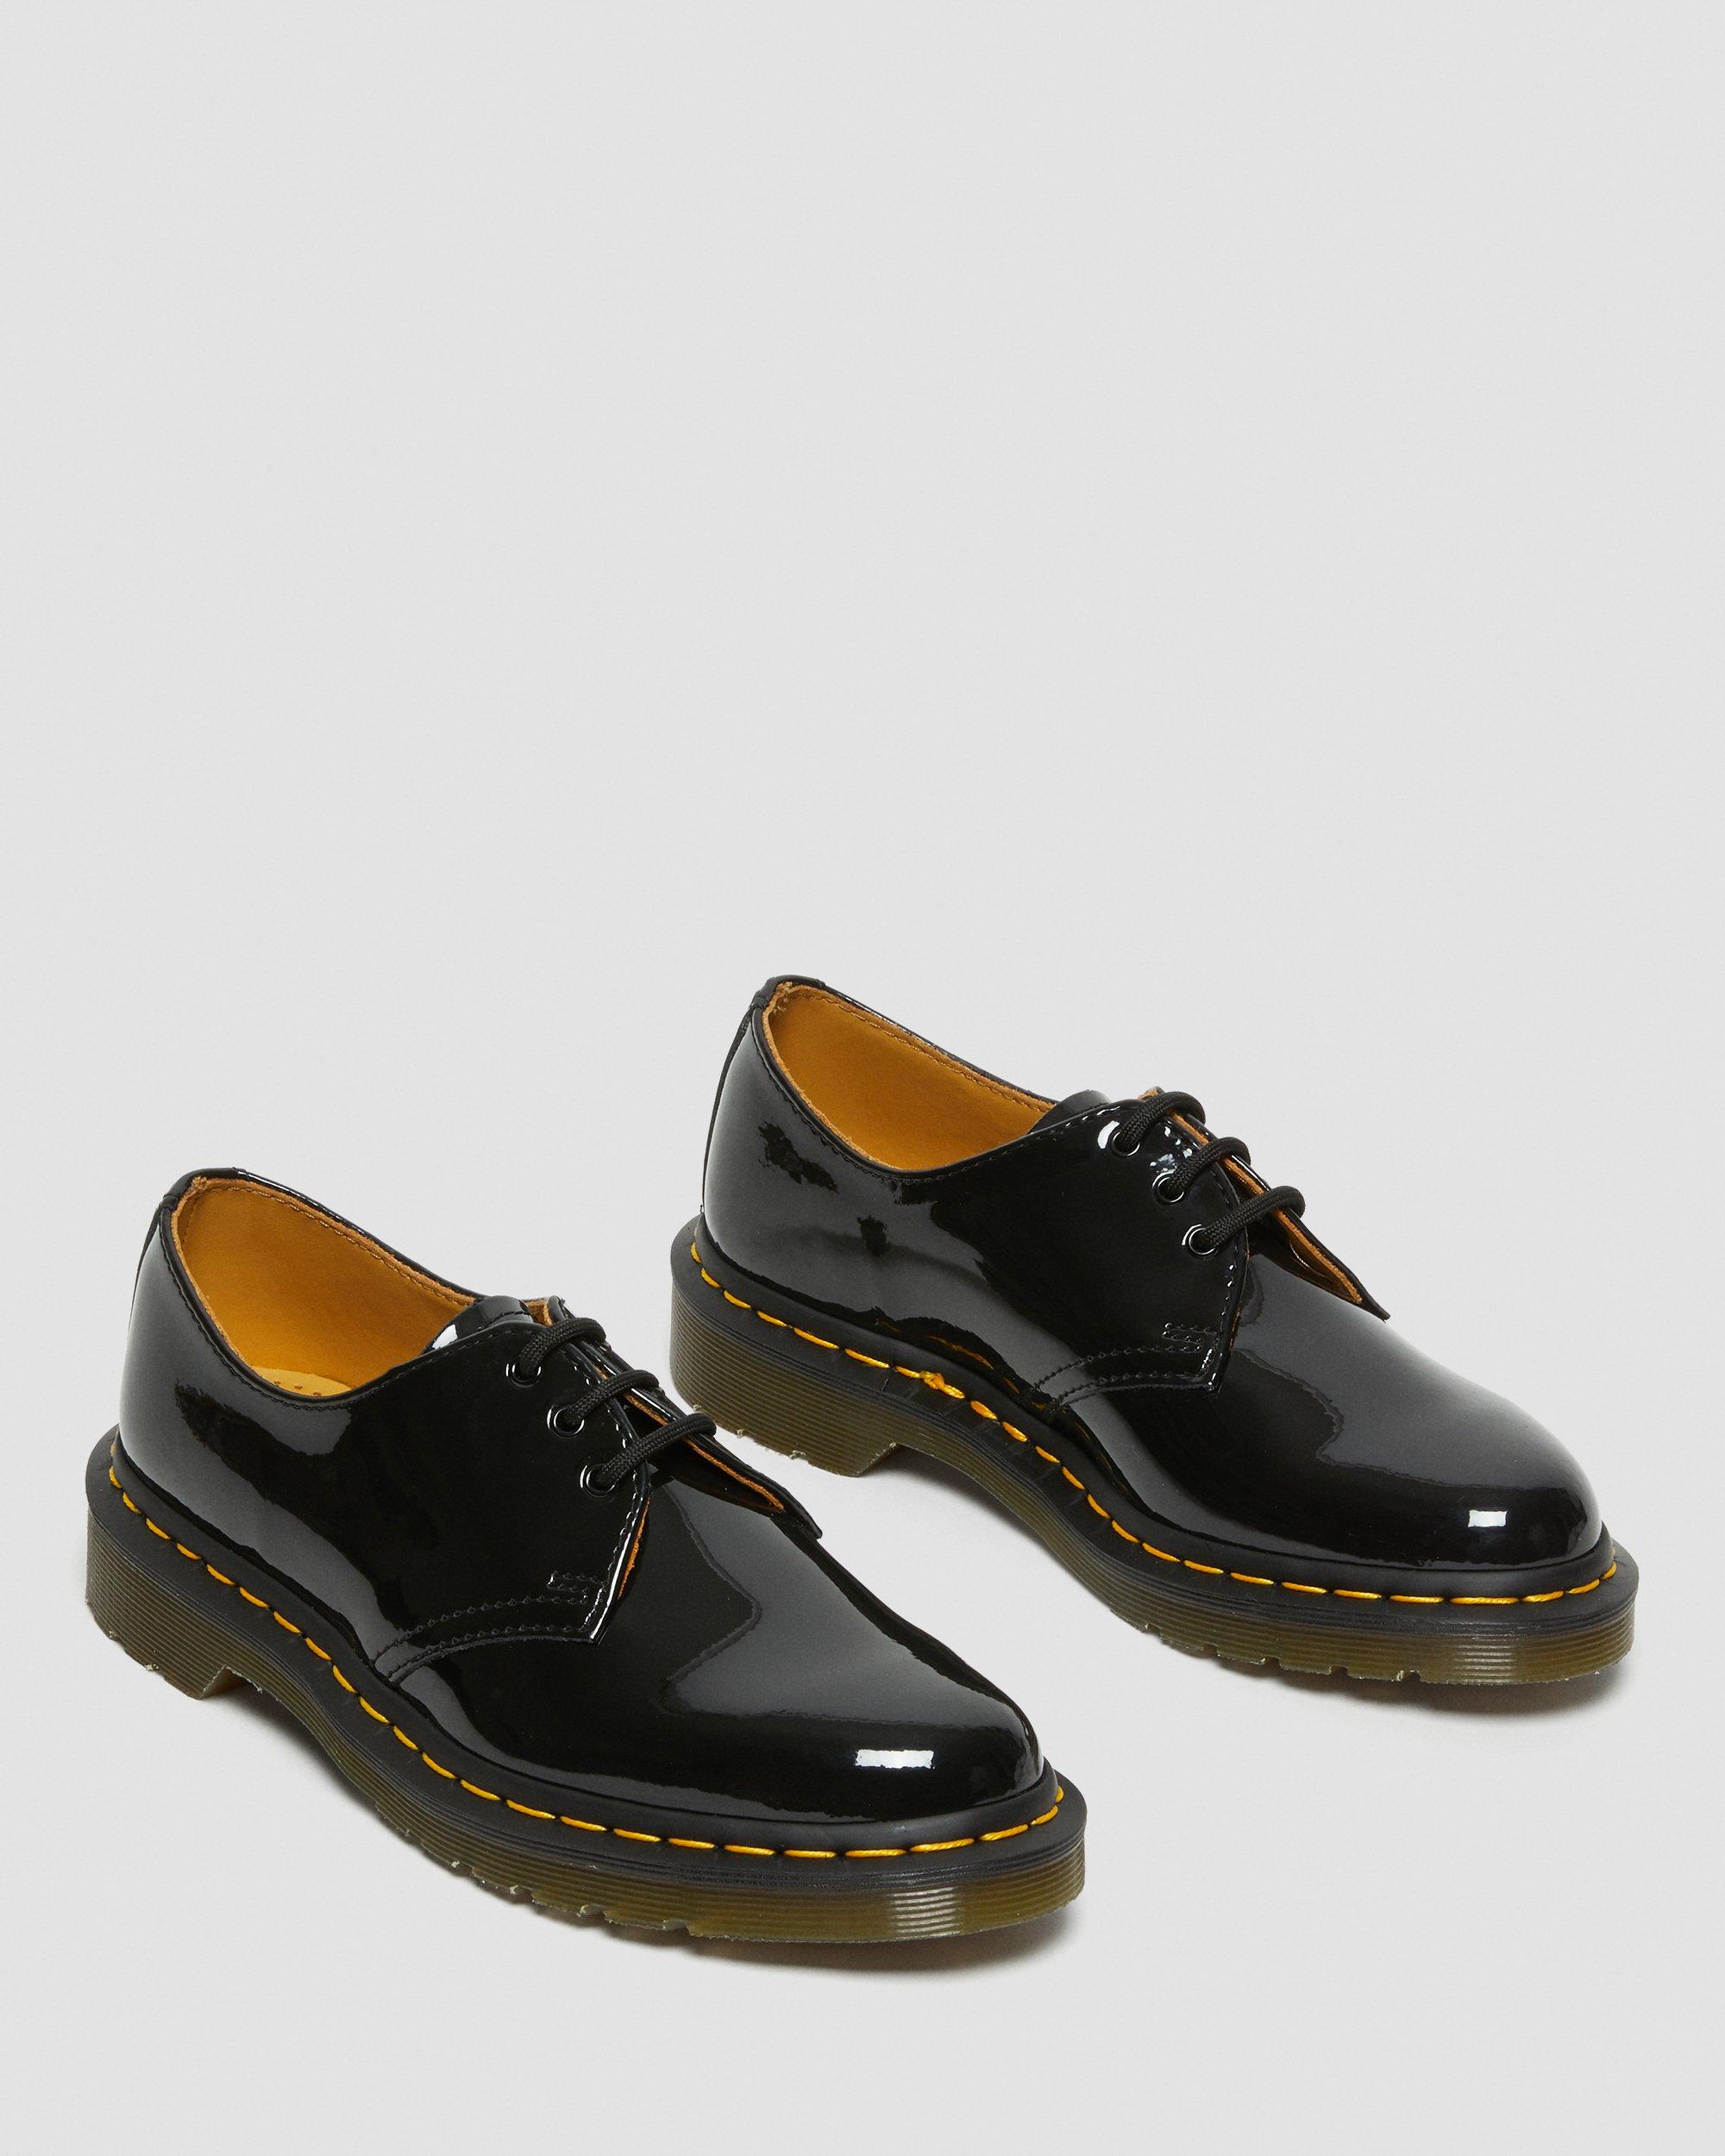 1461 Women's Patent Leather Oxford Shoes | Dr. Martens